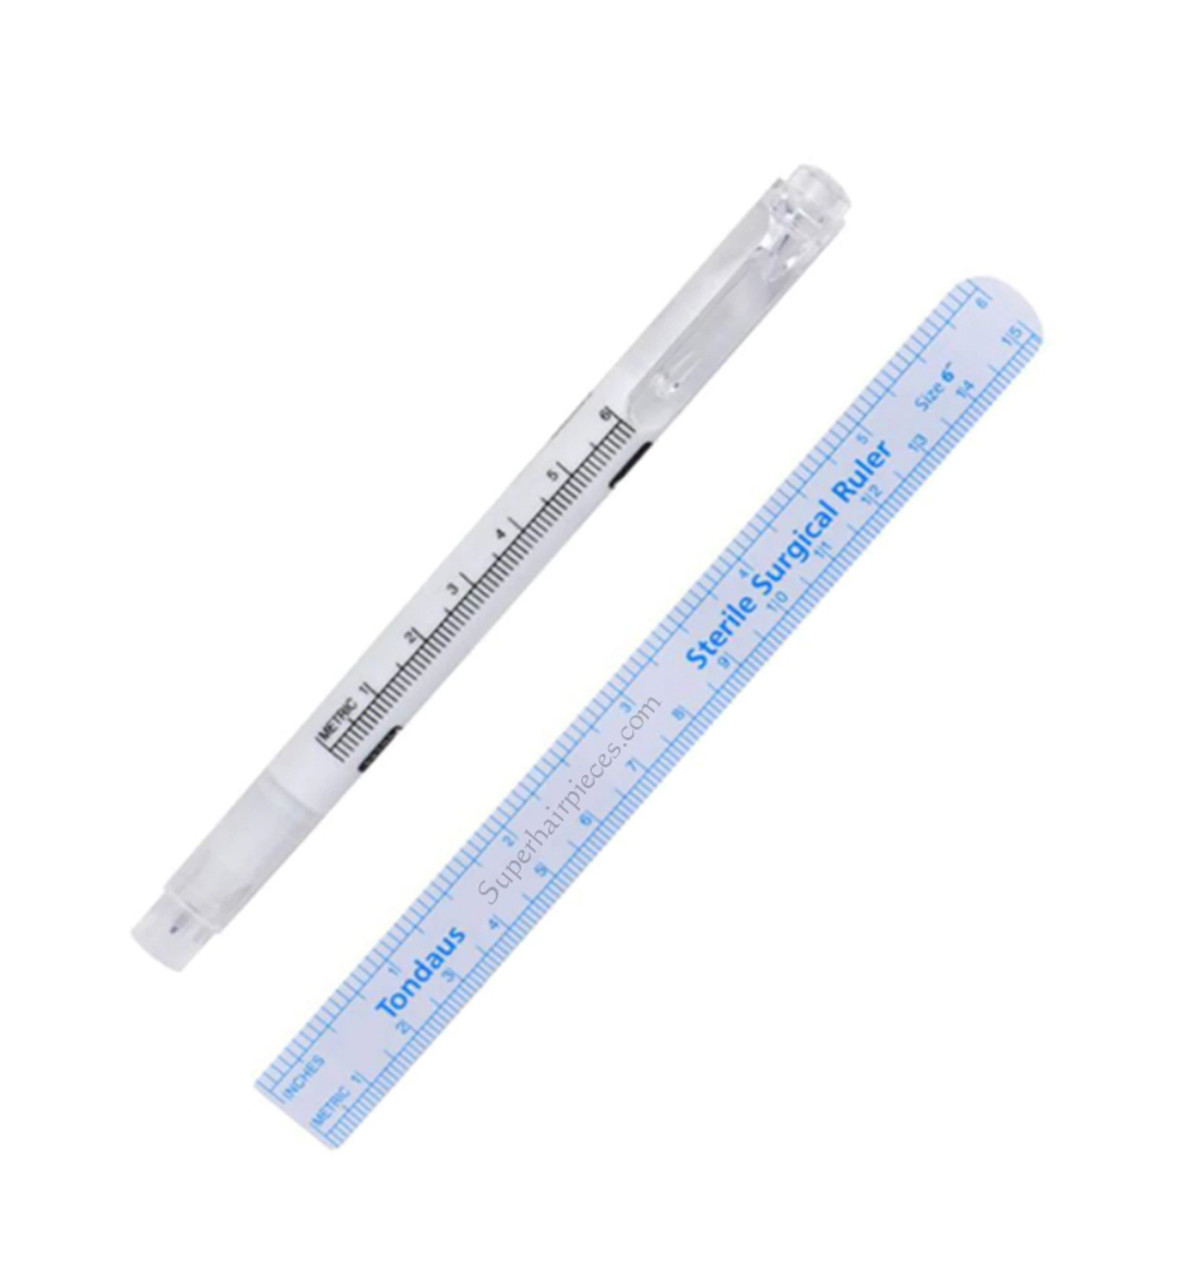 Sterile and non sterile waterproof ink markers